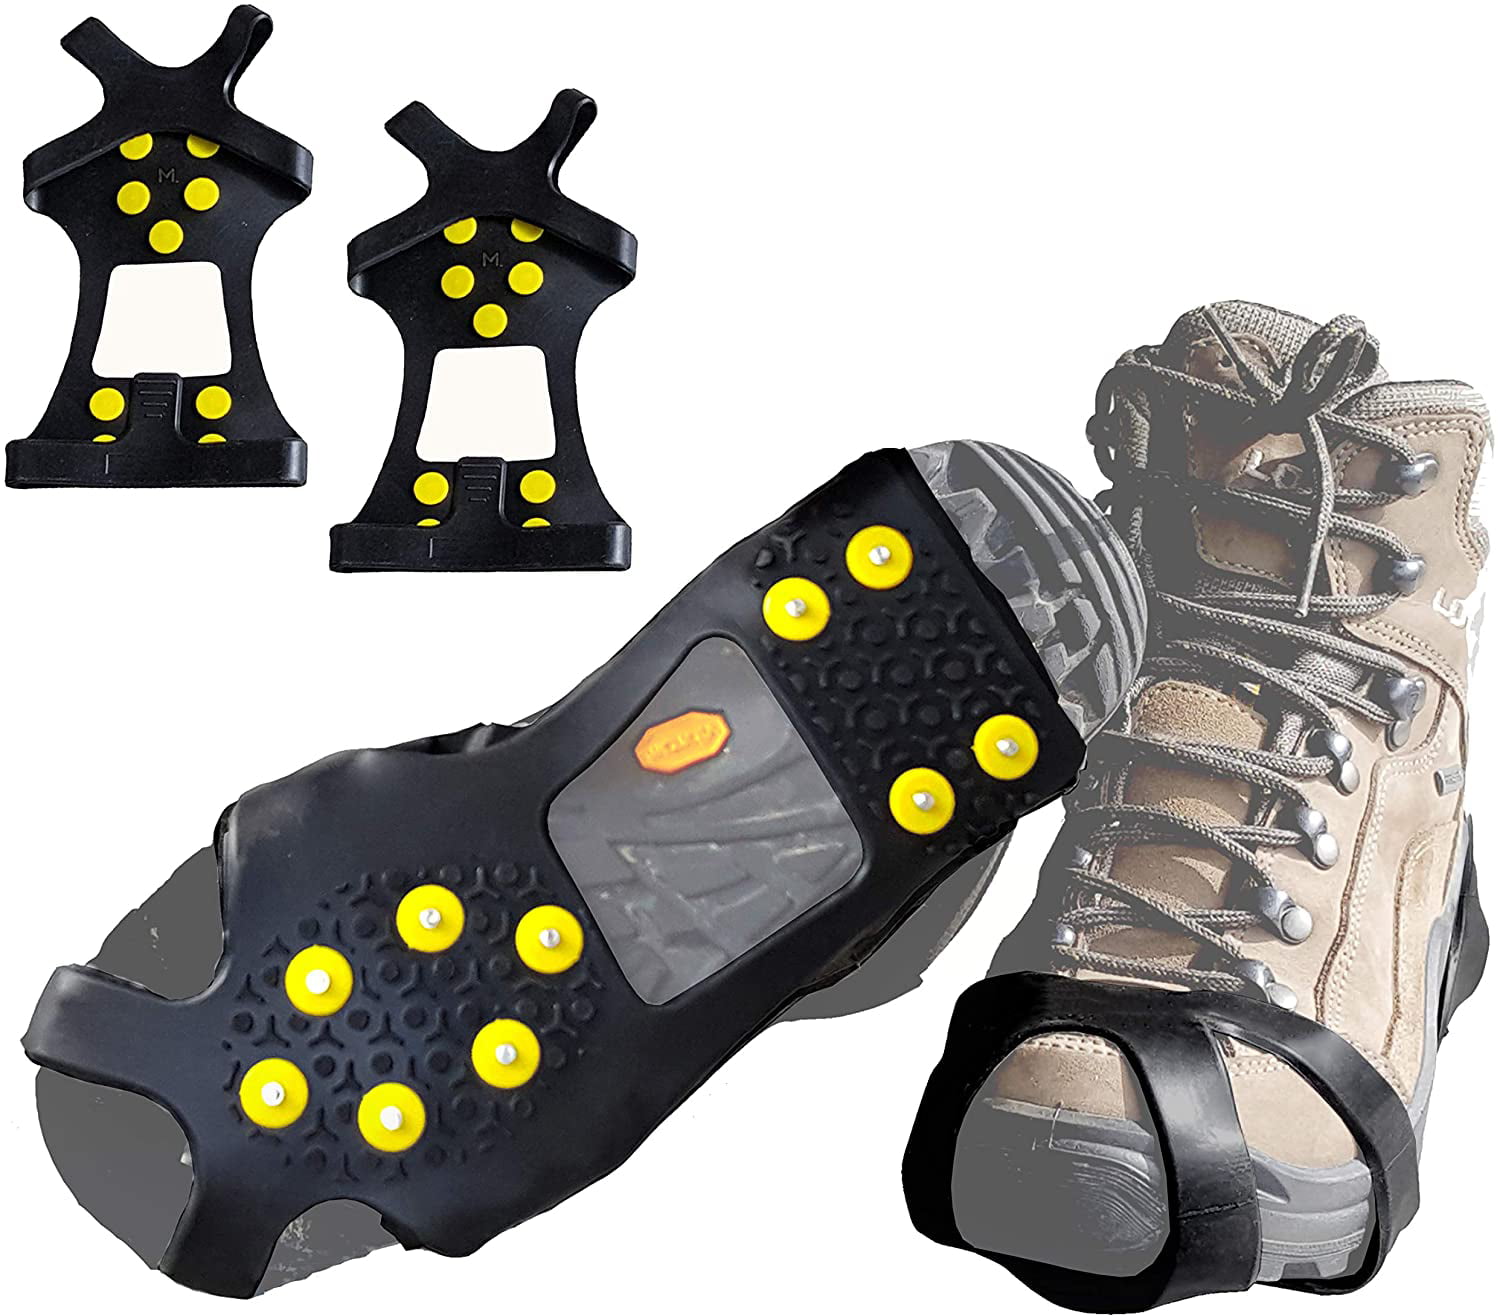 Ice Cleats Snow Grippers for Shoes and Boots Crampons Ice Grips Anit Slip Silicone Rubber Walk Traction Ice Grippers Stainless Steel 10 Spikes Slip-on Stretch Footwear S/M/L/XL